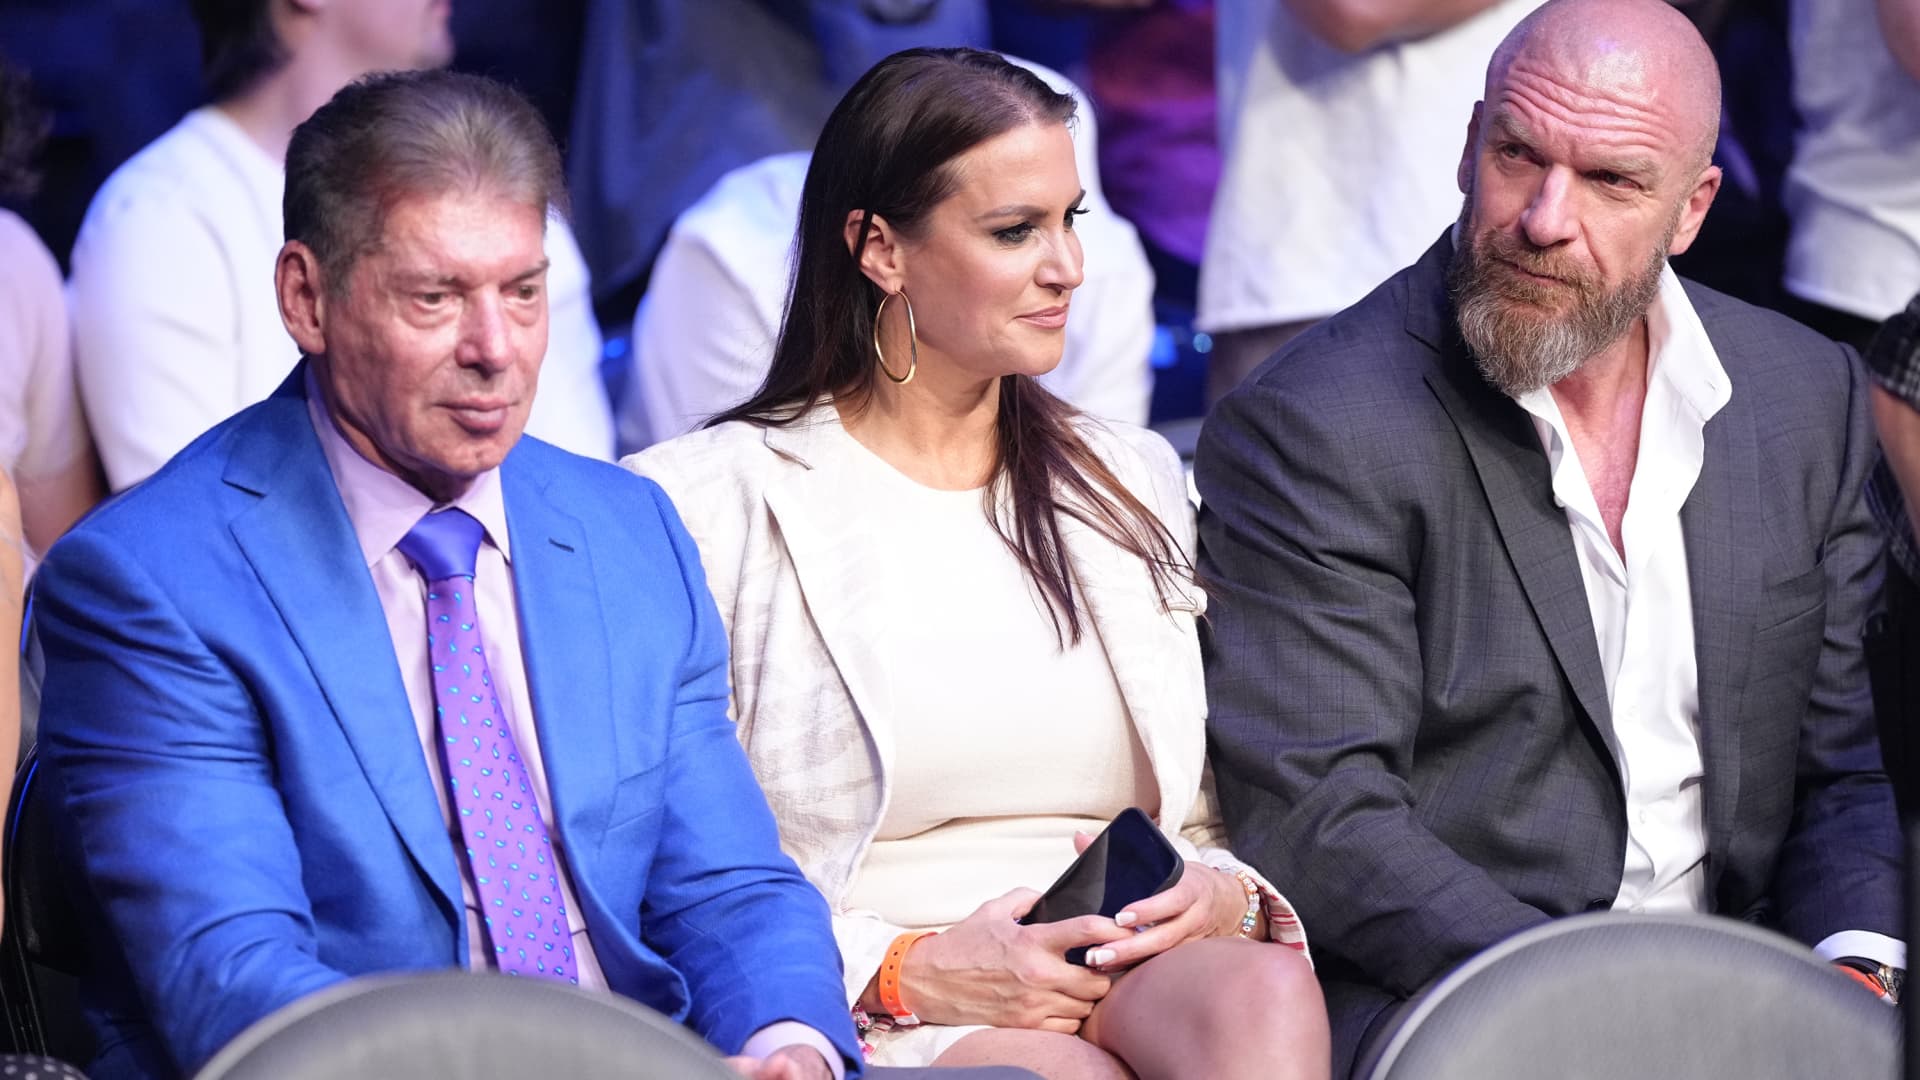 WWE hints at other probes into Vince McMahon misconduct, discloses $14.6 million in payments